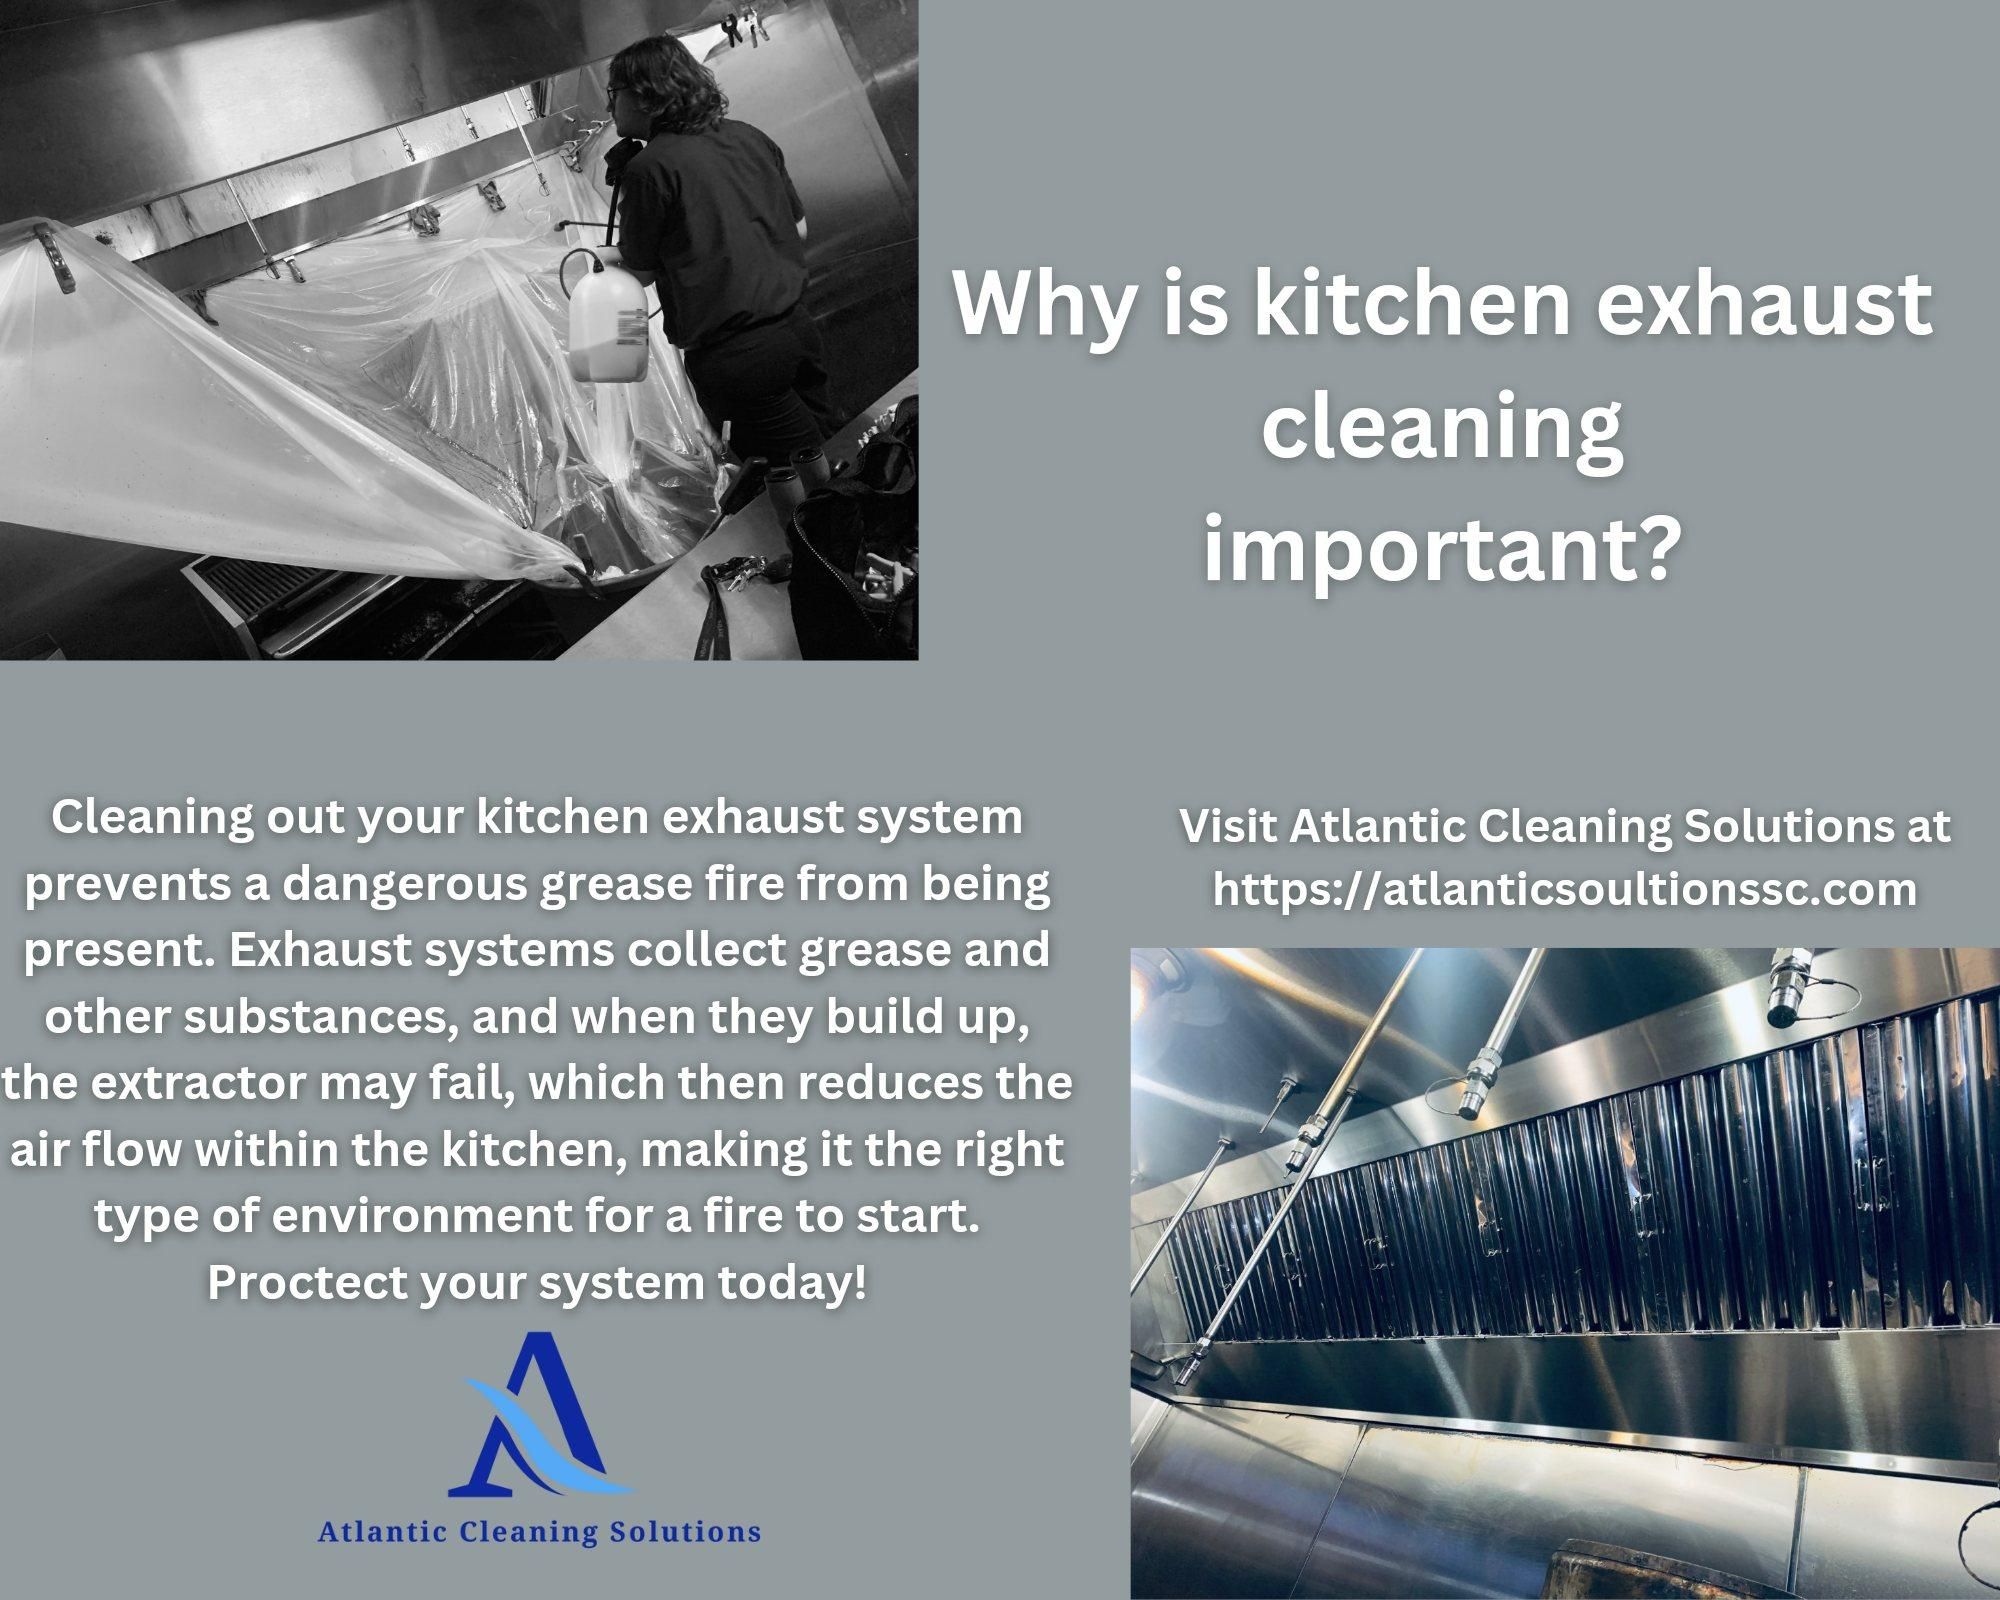  for Atlantic Cleaning Solutions in Columbia, SC